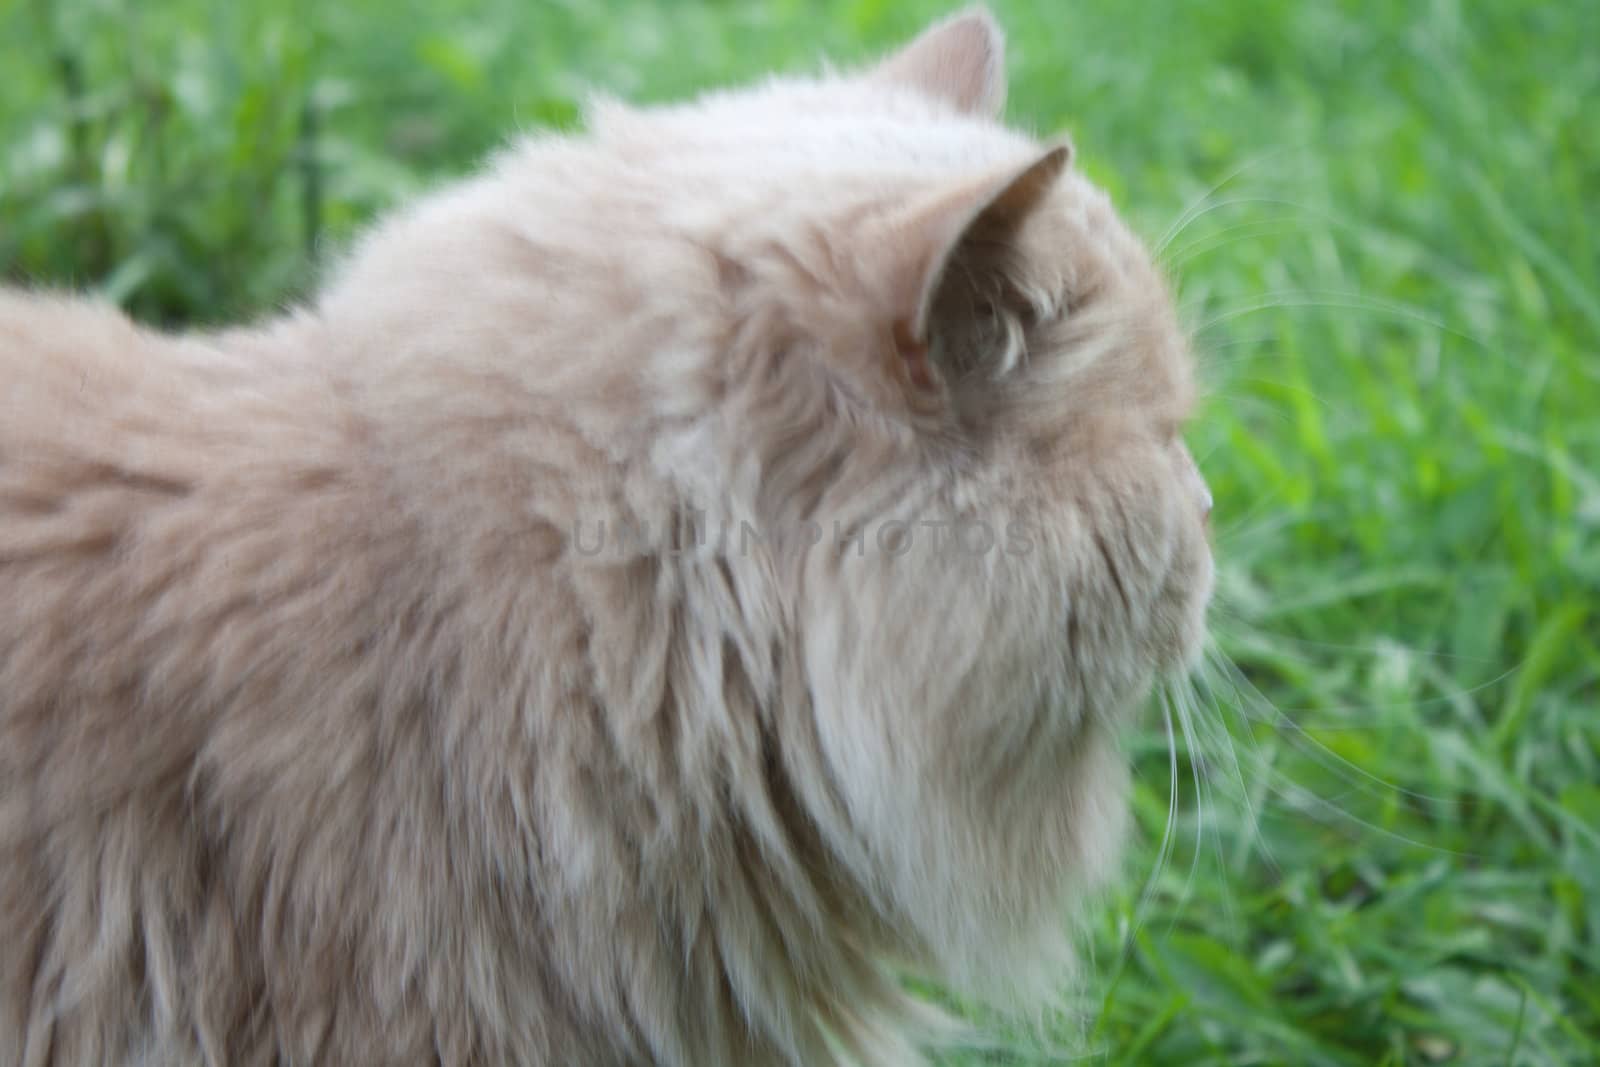 Persian breed cat is a yellow coloring on the grass in the street shooting